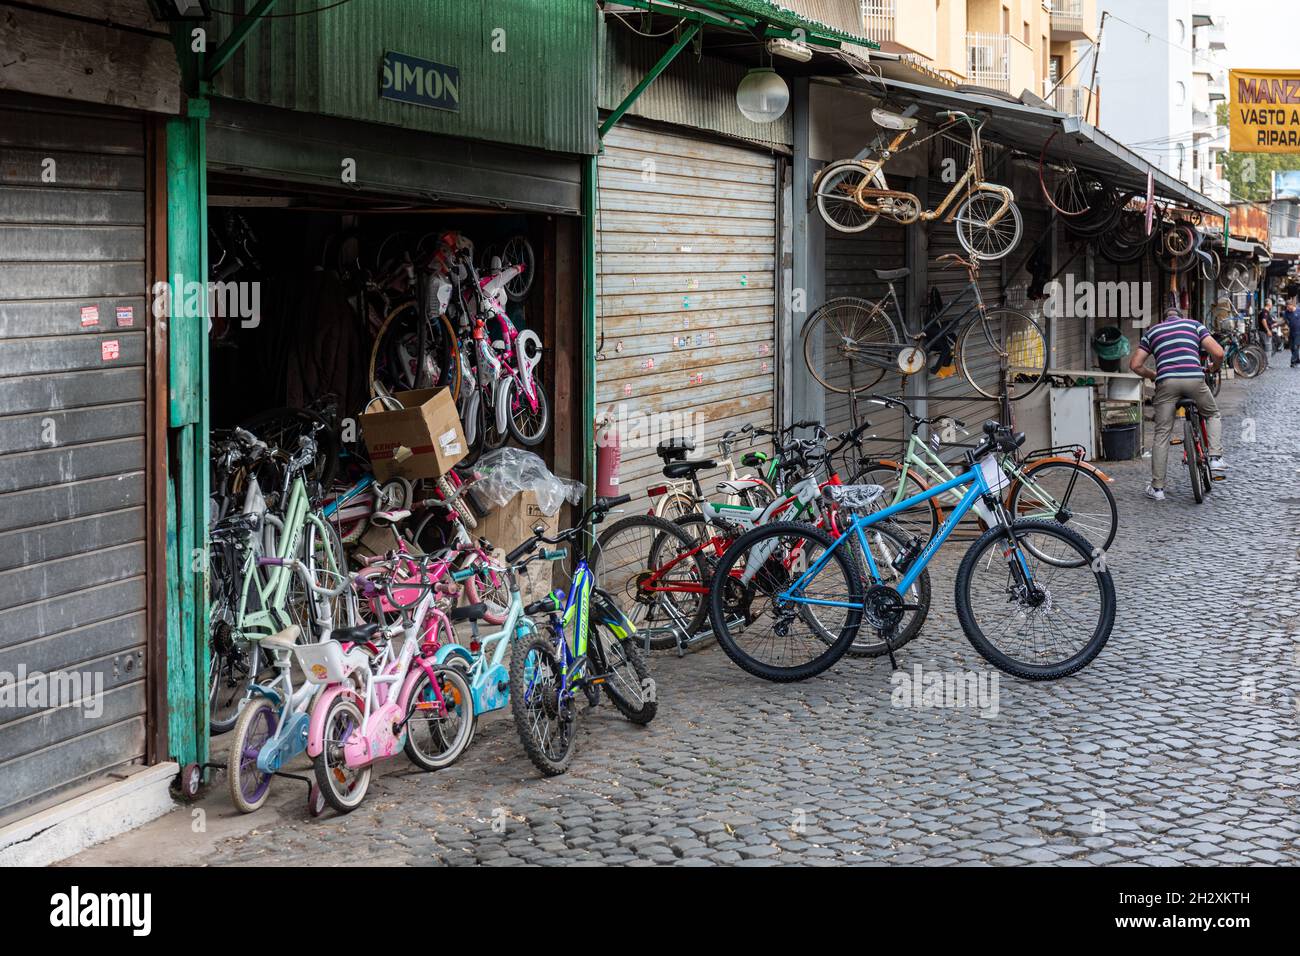 Used second-hand bicycles on sale at one of the Clivio Portuense garages in Trastevere district of Rome, Italy Stock Photo